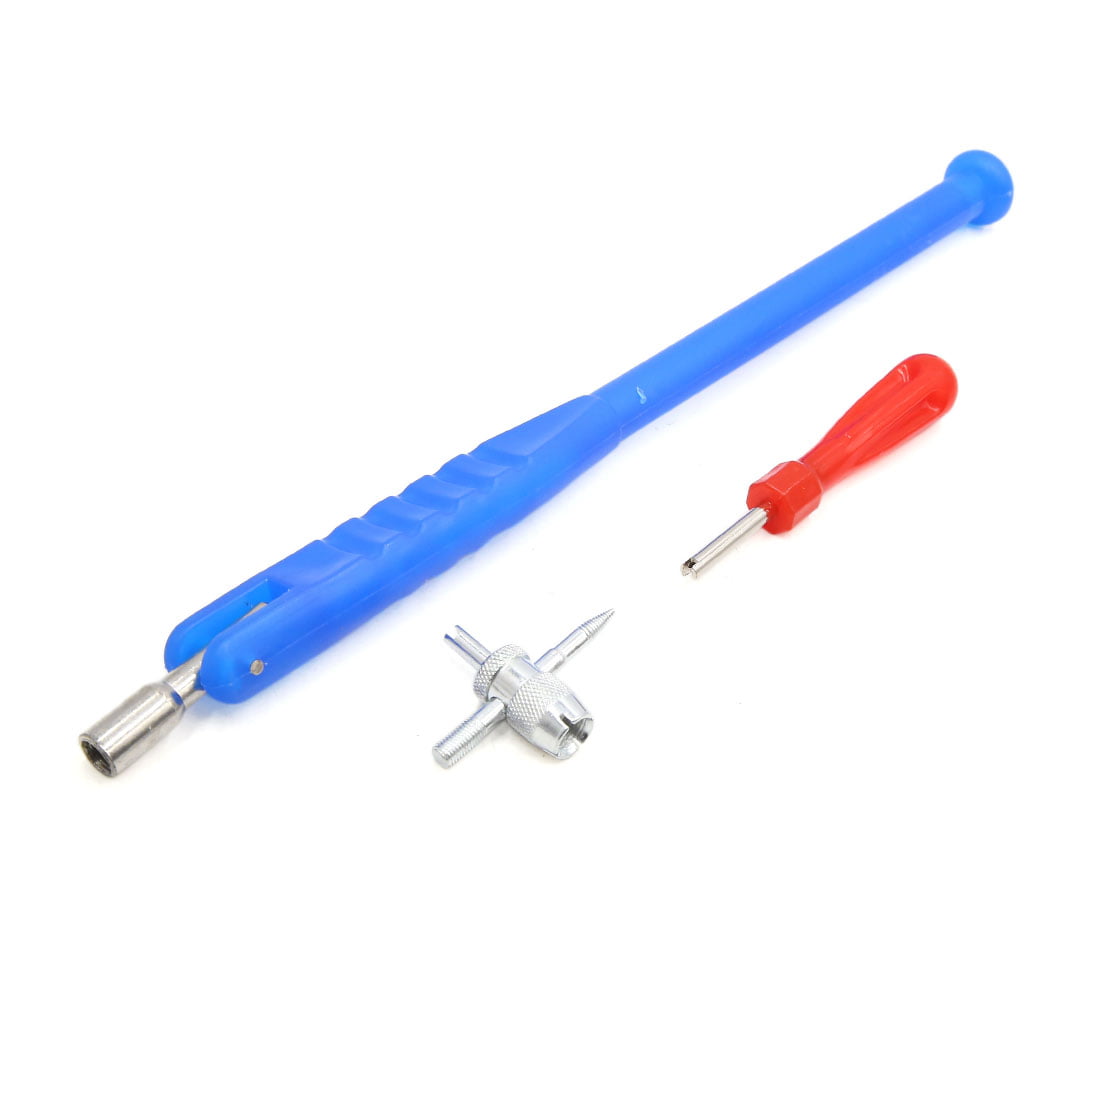 2 Ways Car Tire Tyre Valve Stem Core Wrench Remover Puller Tire Repair Tools 